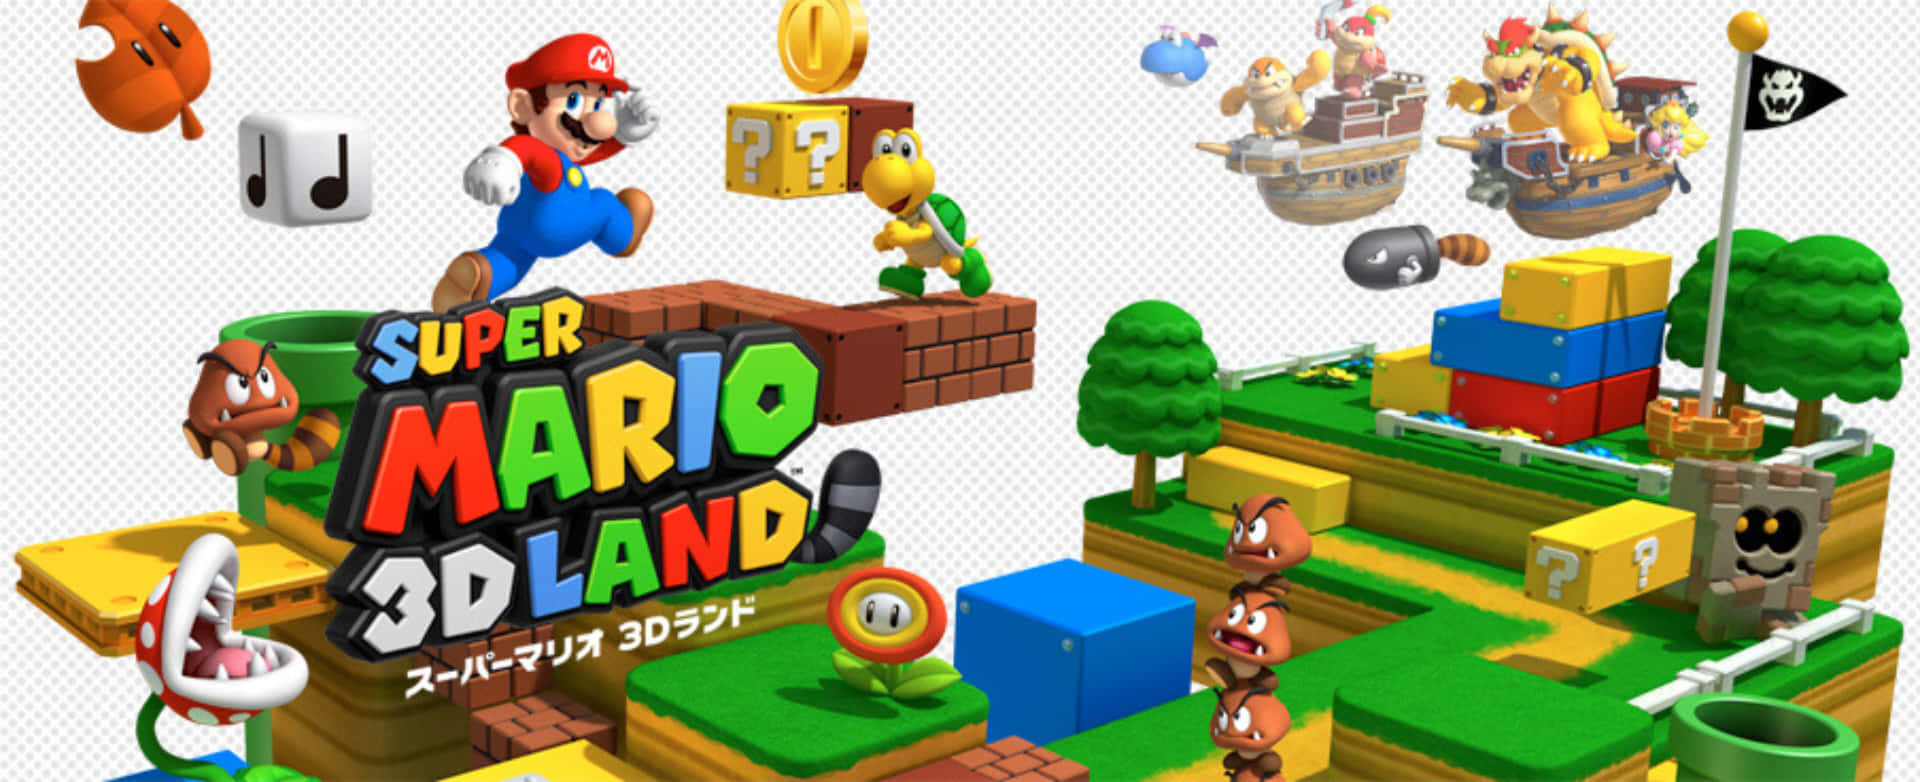 Download Super Mario 3d Ready For Some Action Wallpaper